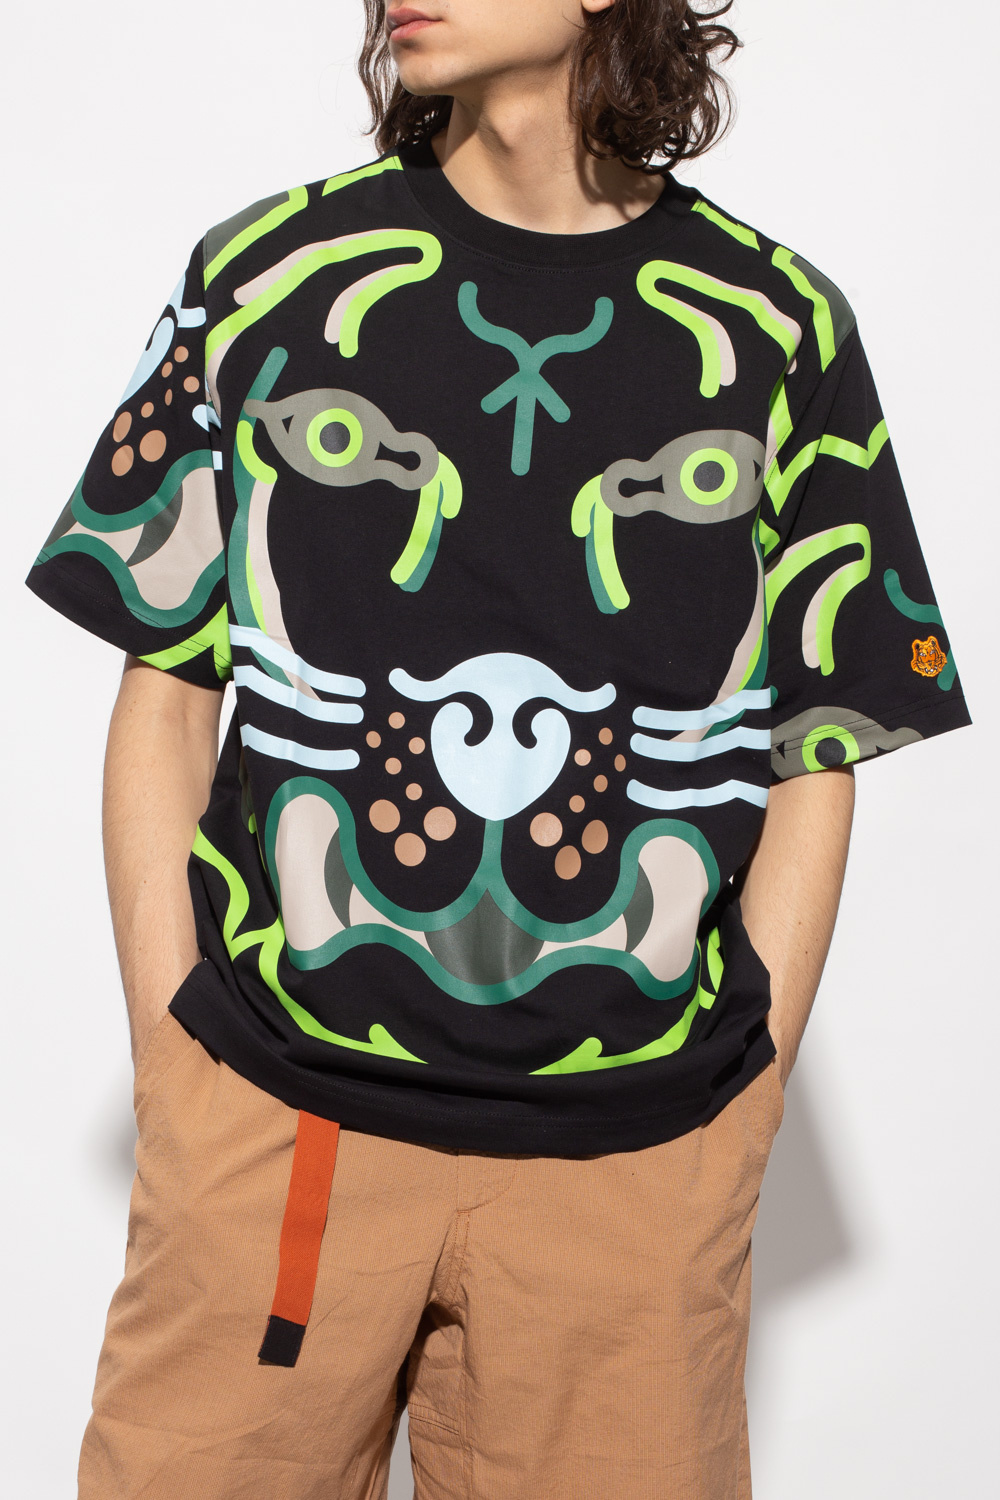 Kenzo Lovely soft and roomy clothing